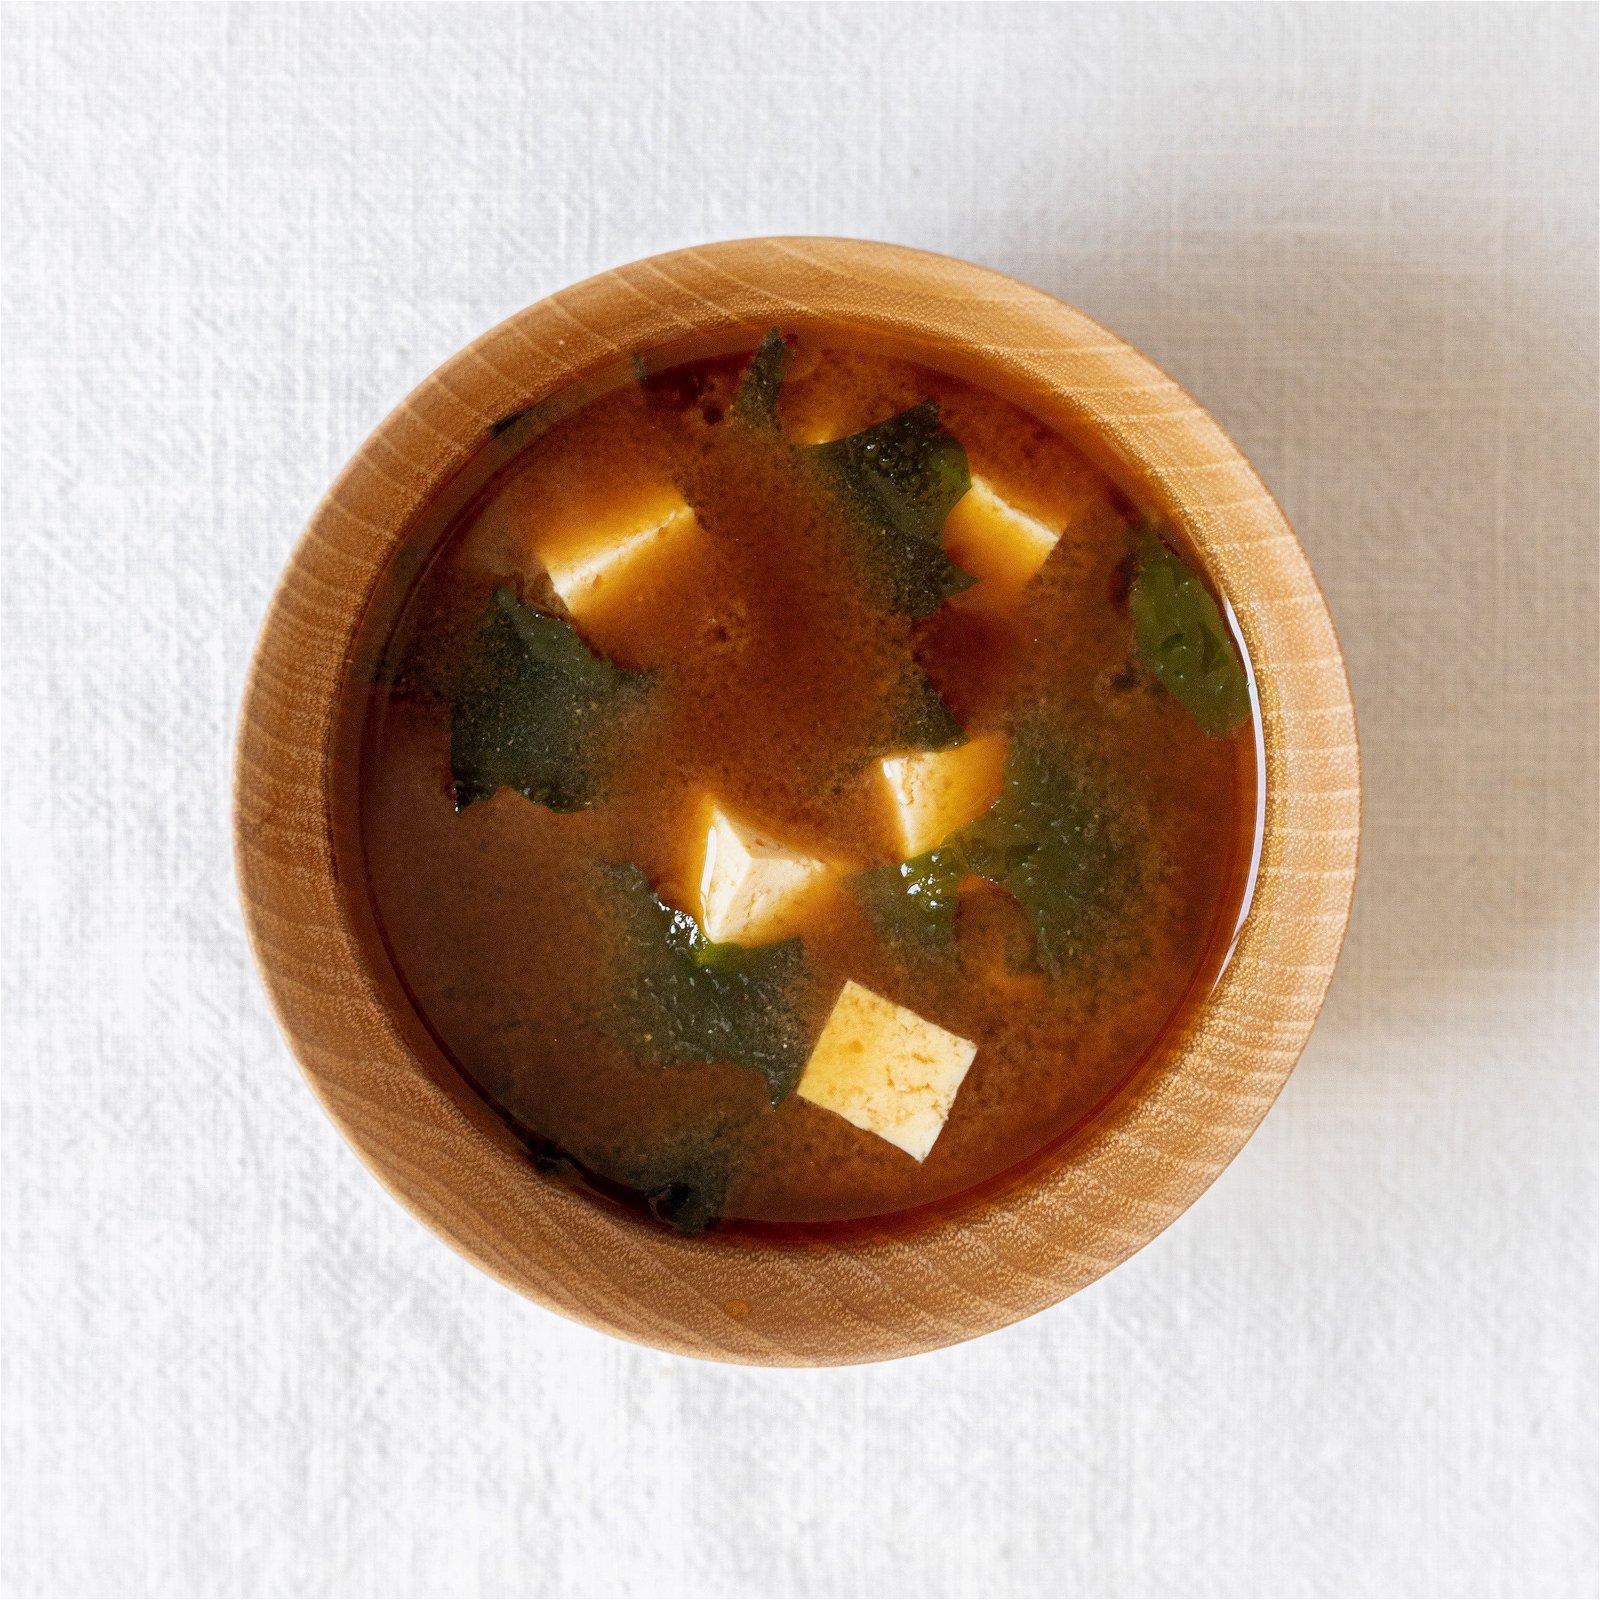 Image of Recette soupe miso traditionnelle